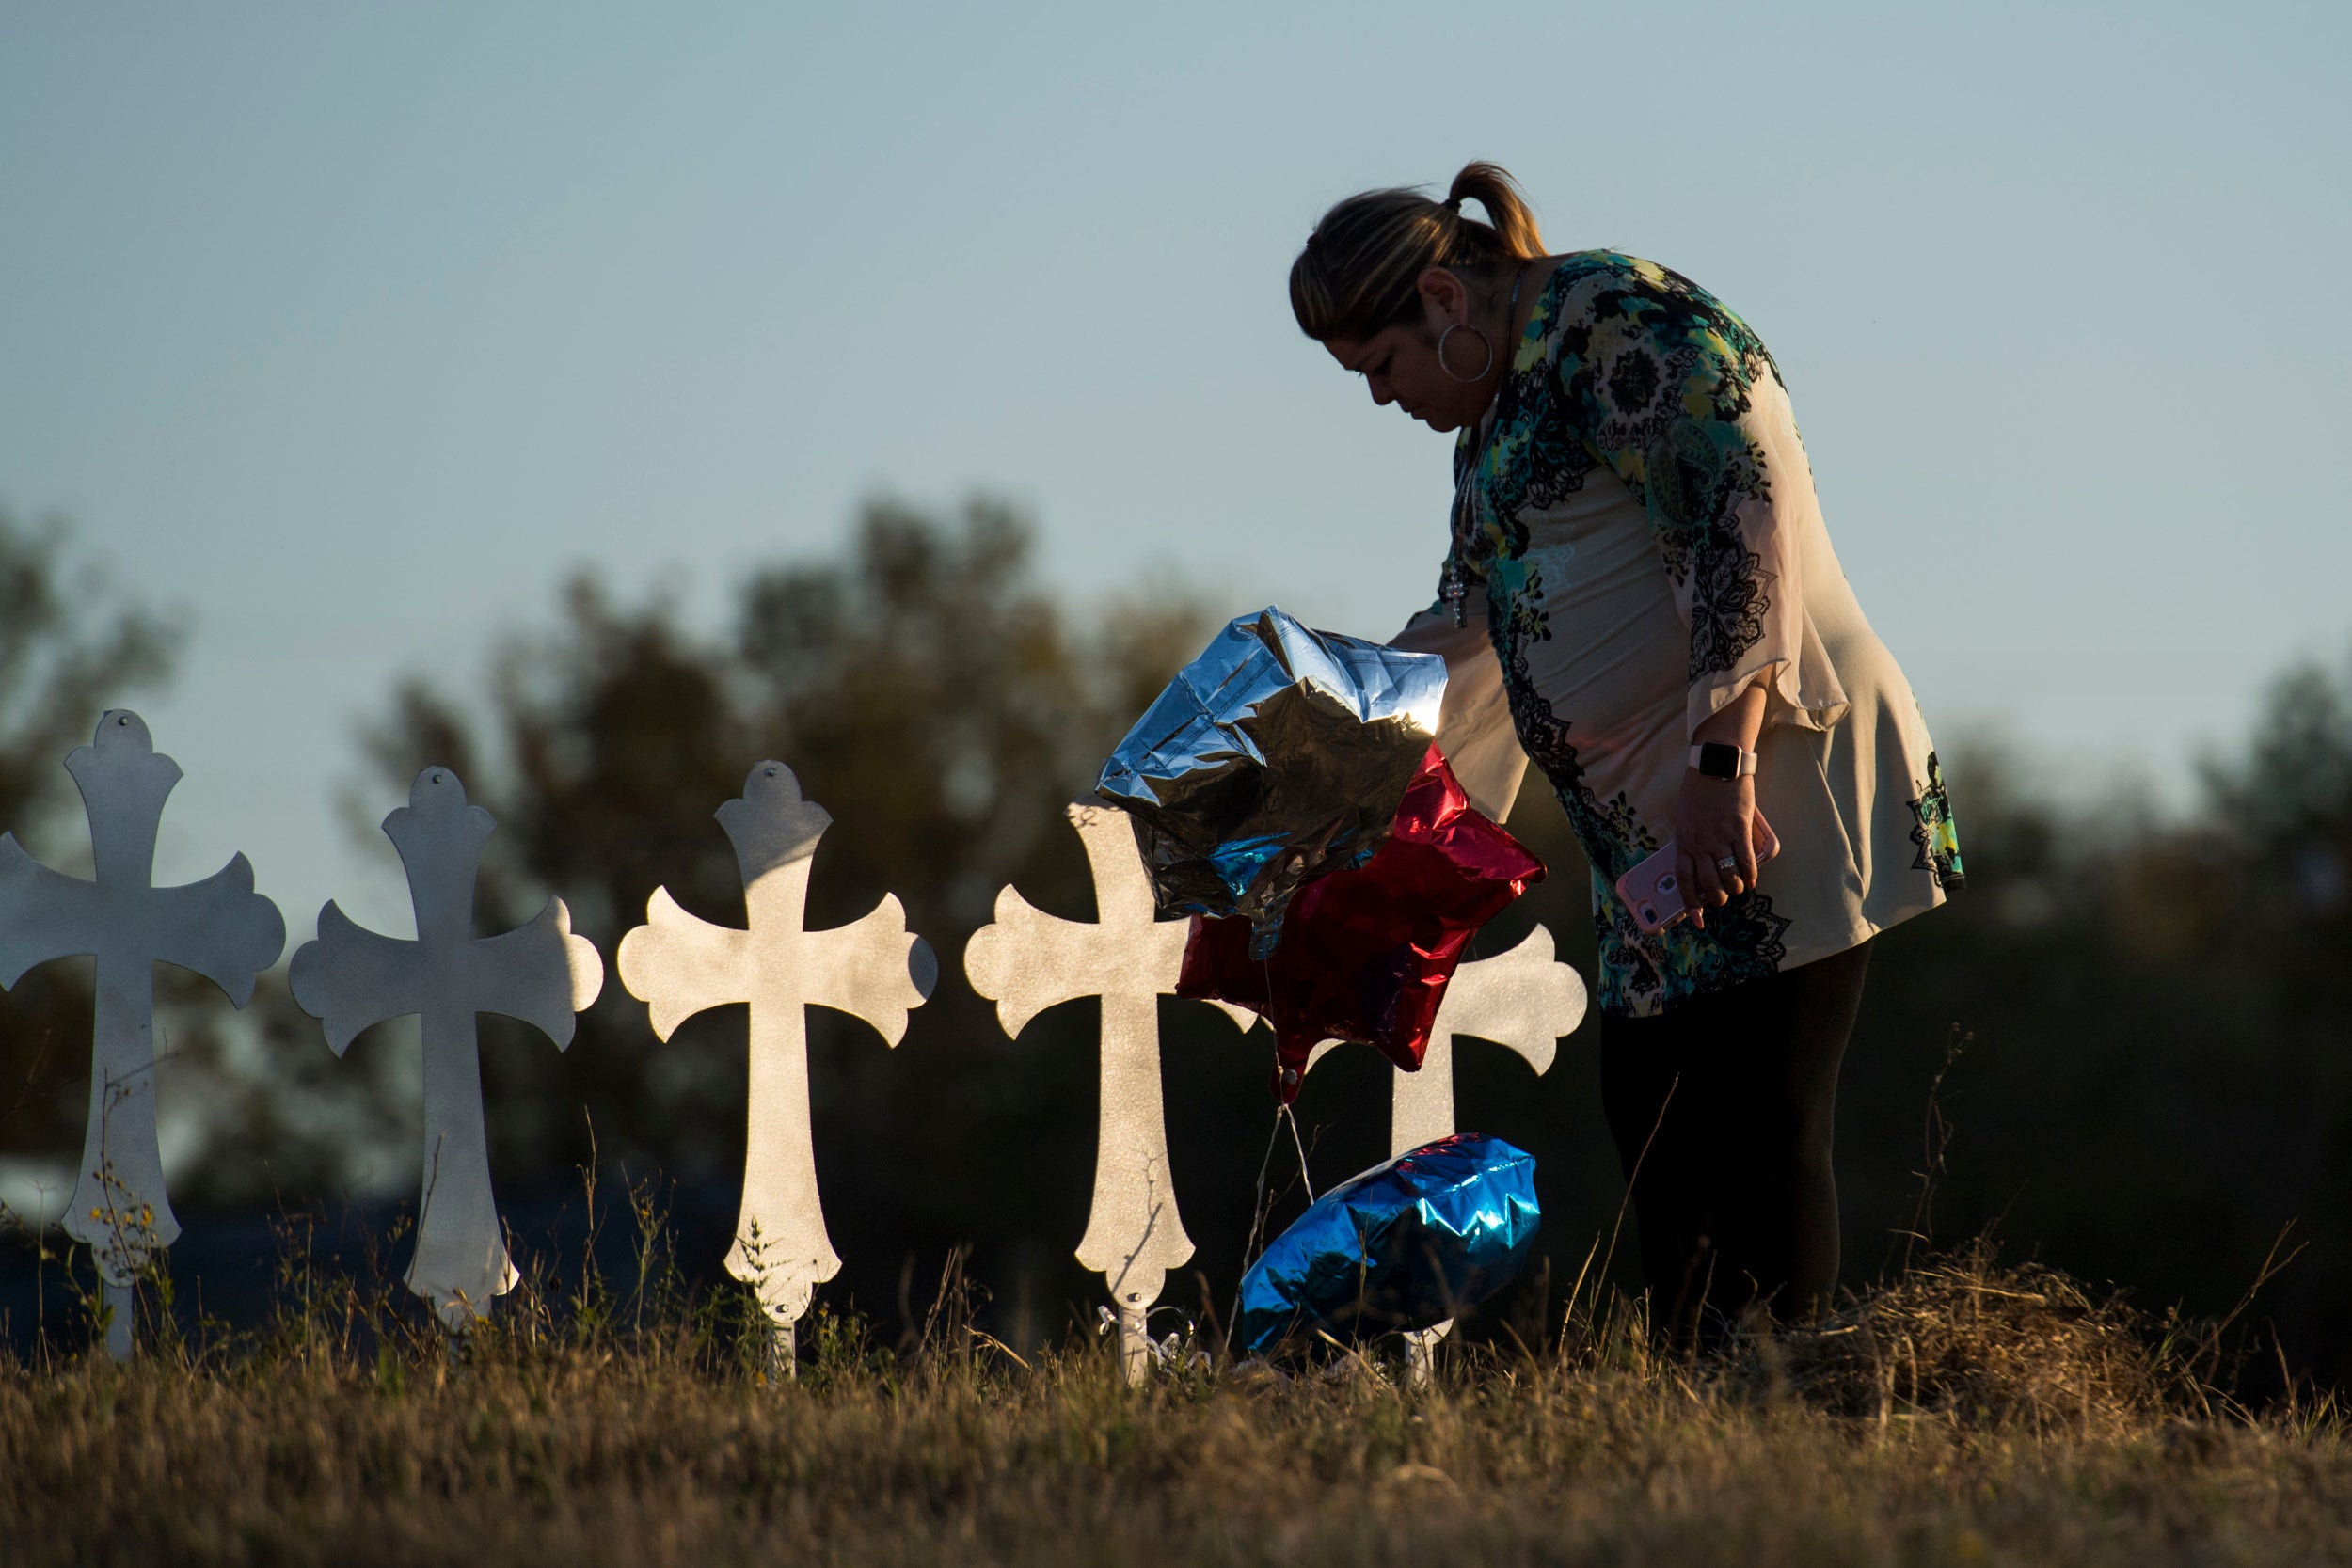 ‘I Could See Death.’ Texas Church Gunman Shot Crying Children At Point-Blank Range